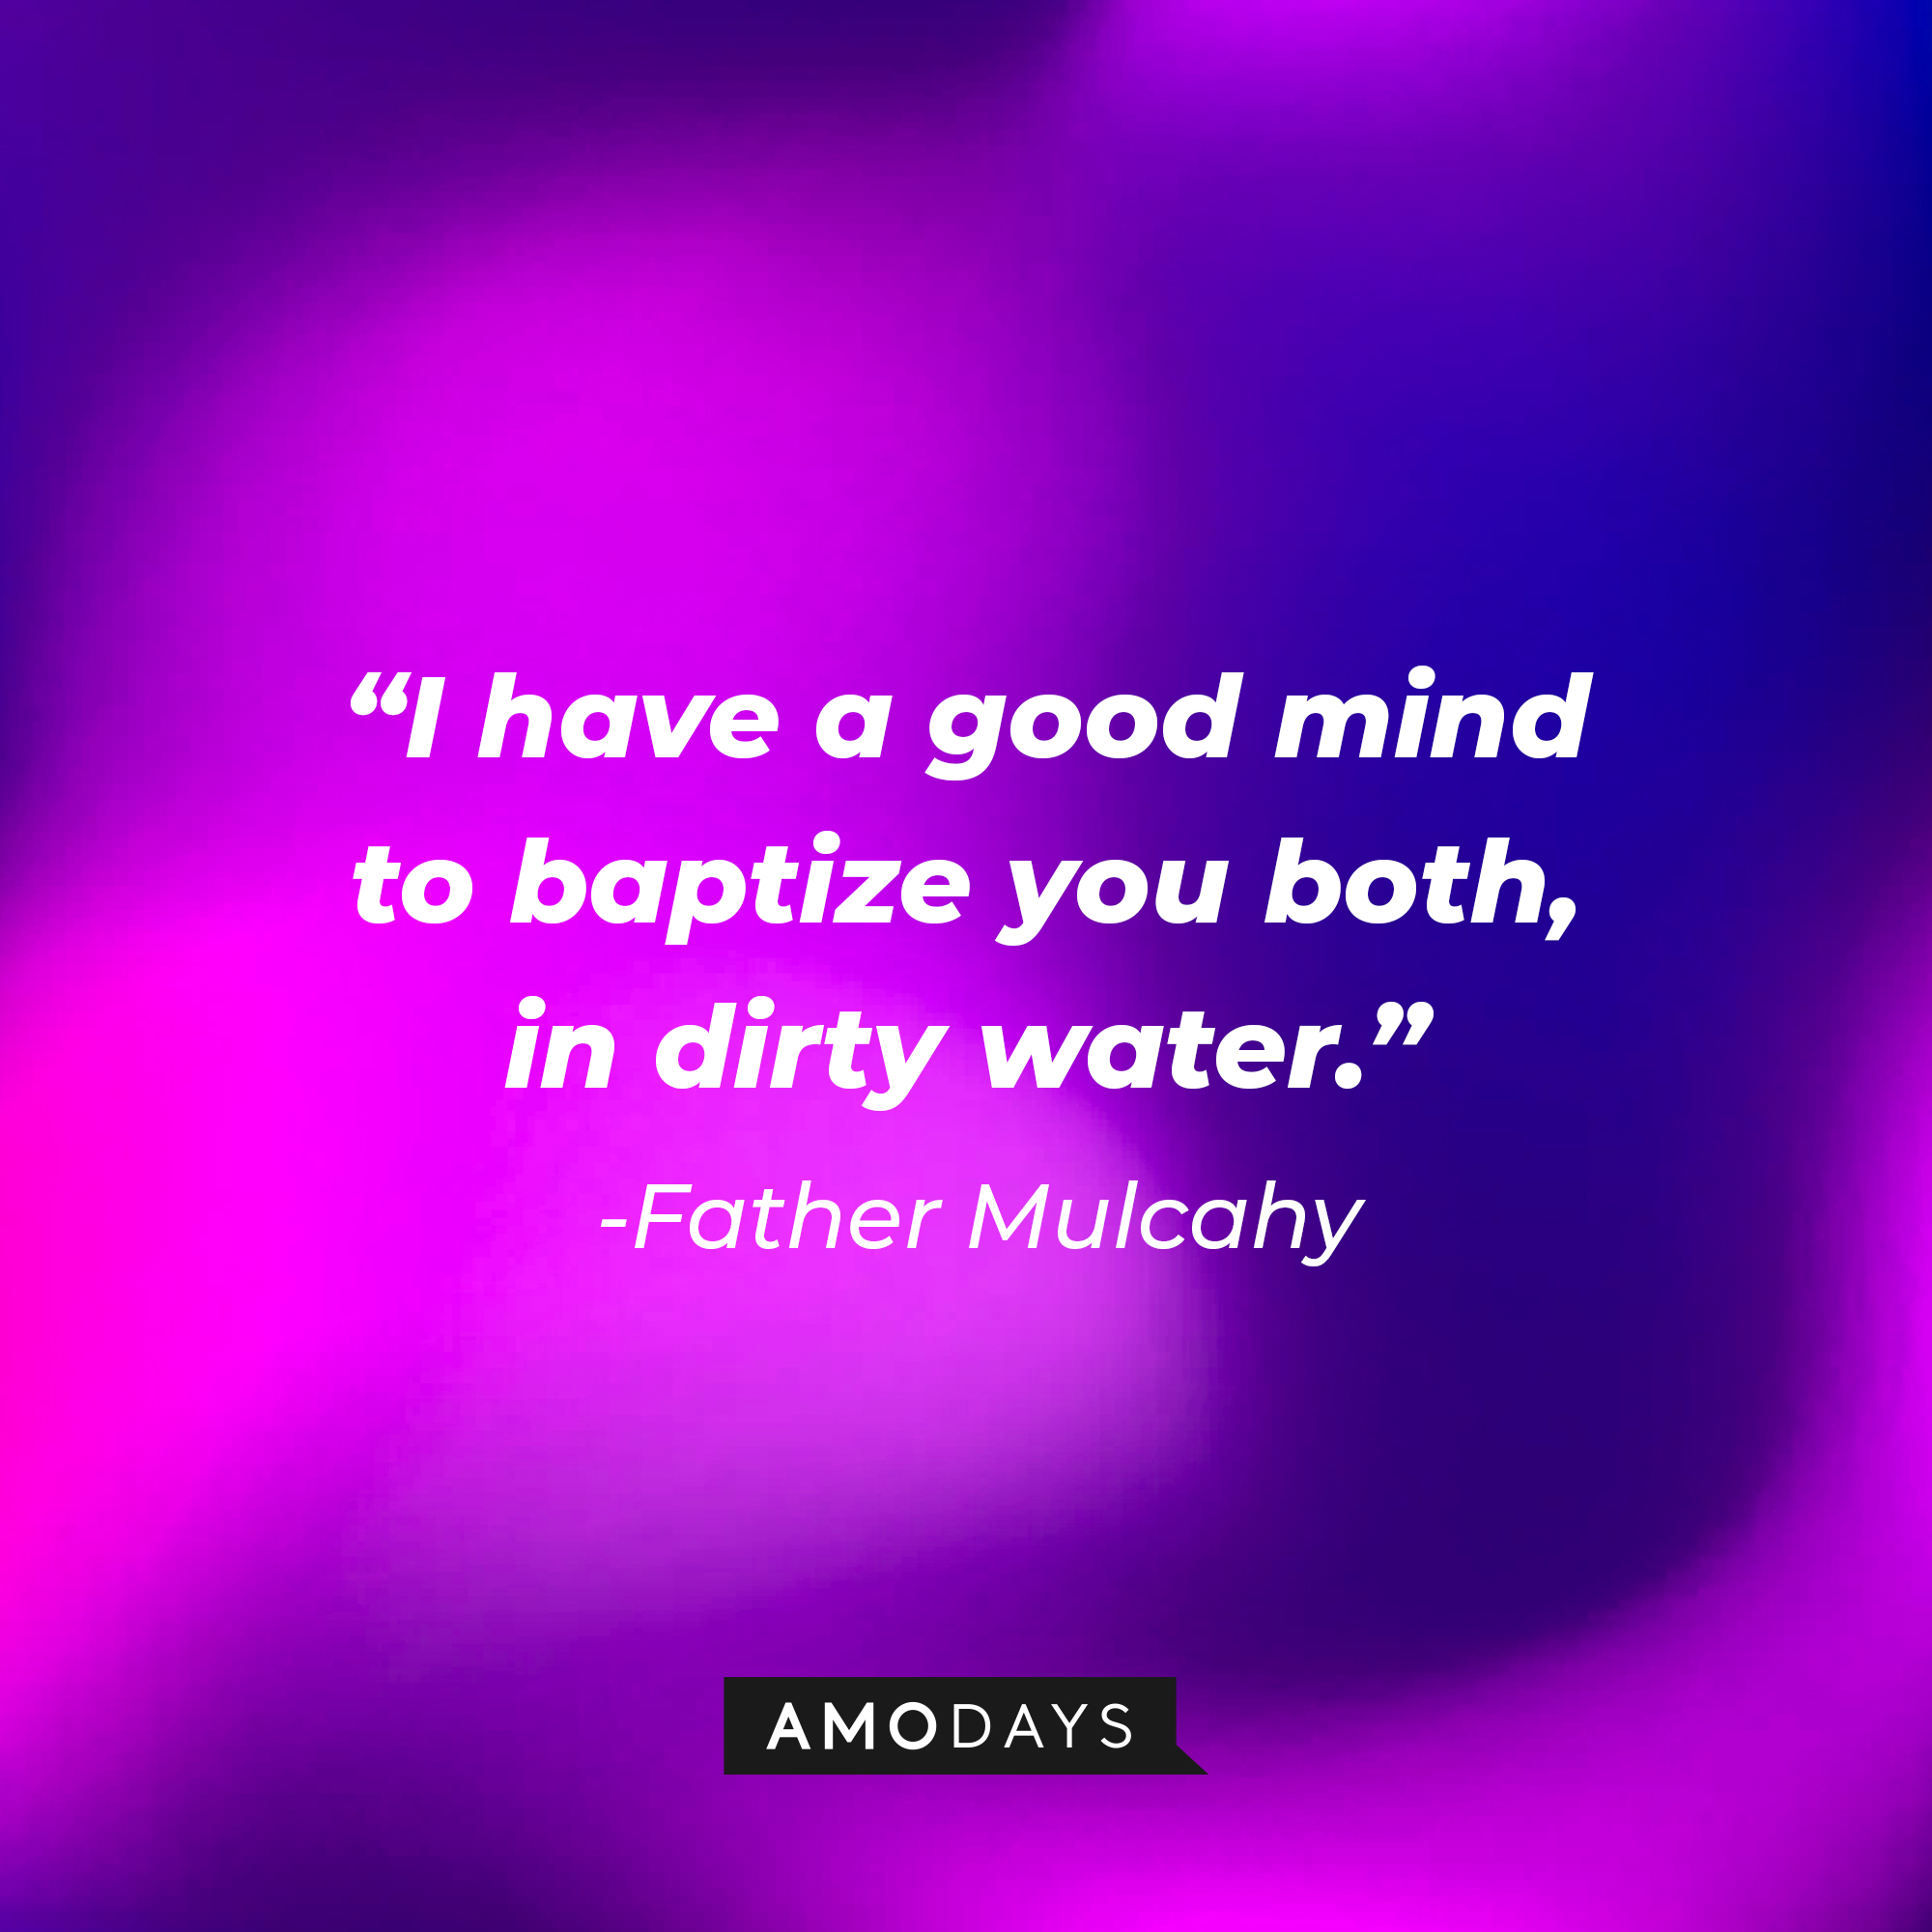 Father Mulcahy’s quote: “I have a good mind to baptize you both in dirty water.” | Source: AmoDays